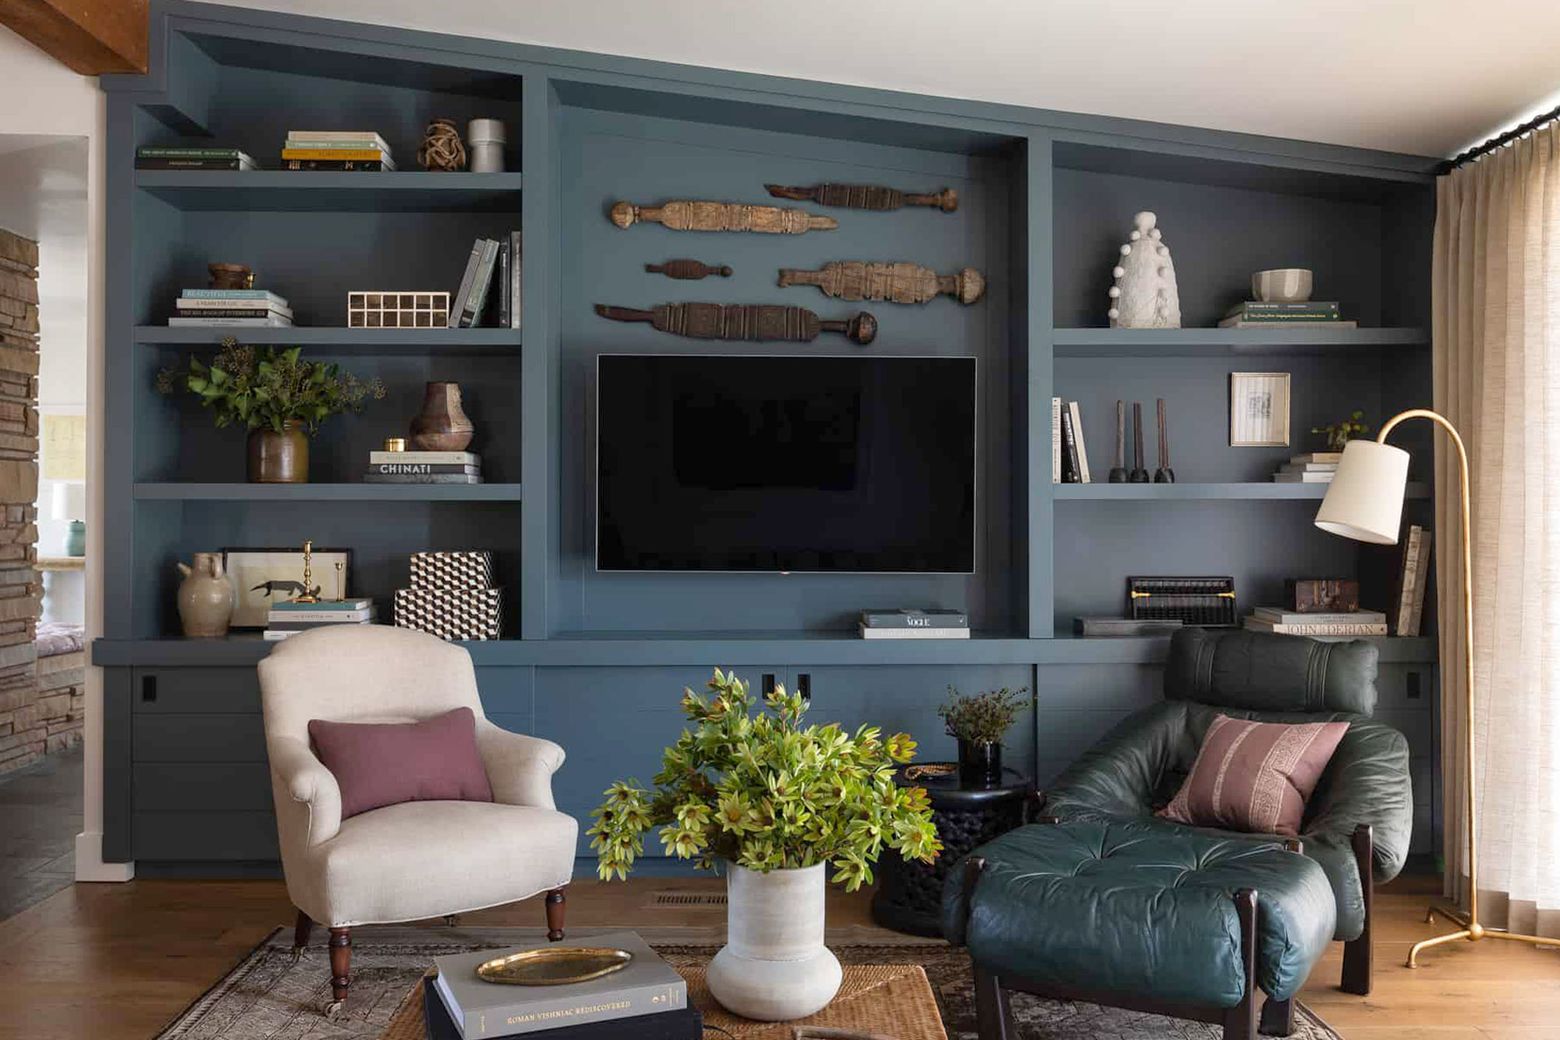 custom storage: how to use built-ins to maximize small spaces